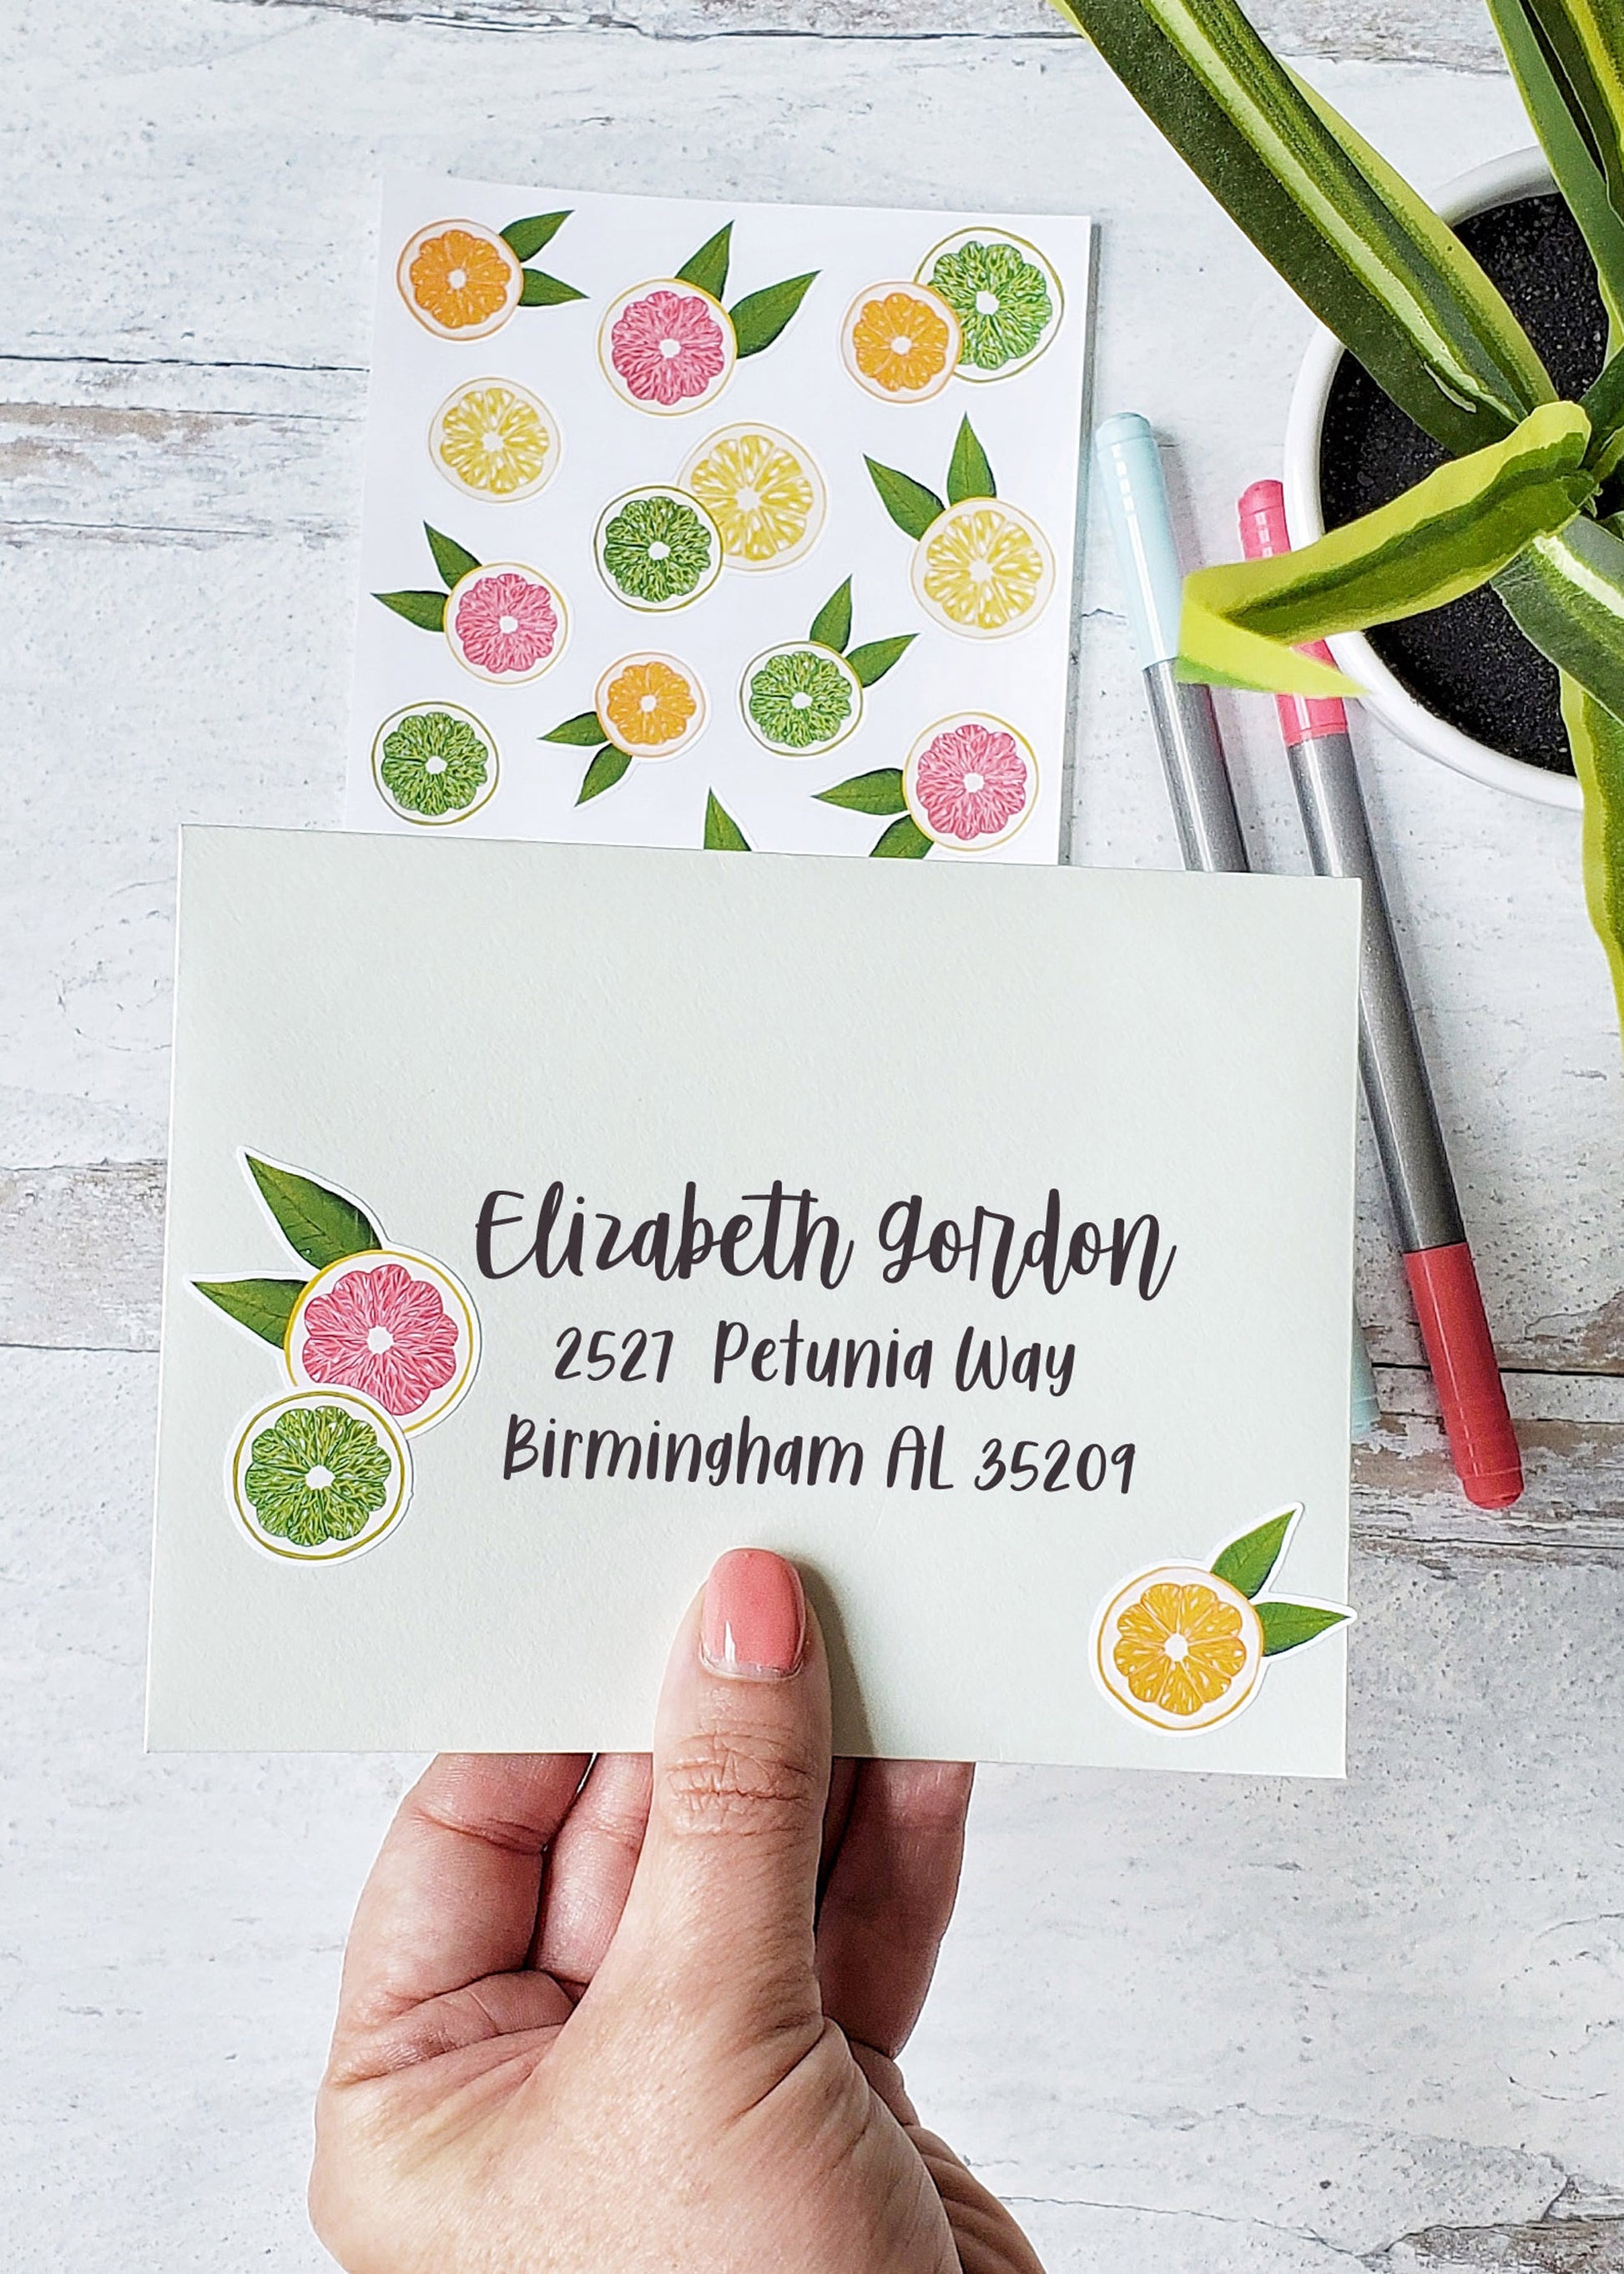 A mailing envelope decorated with an orange, lemon and pink grapefruit sticker.